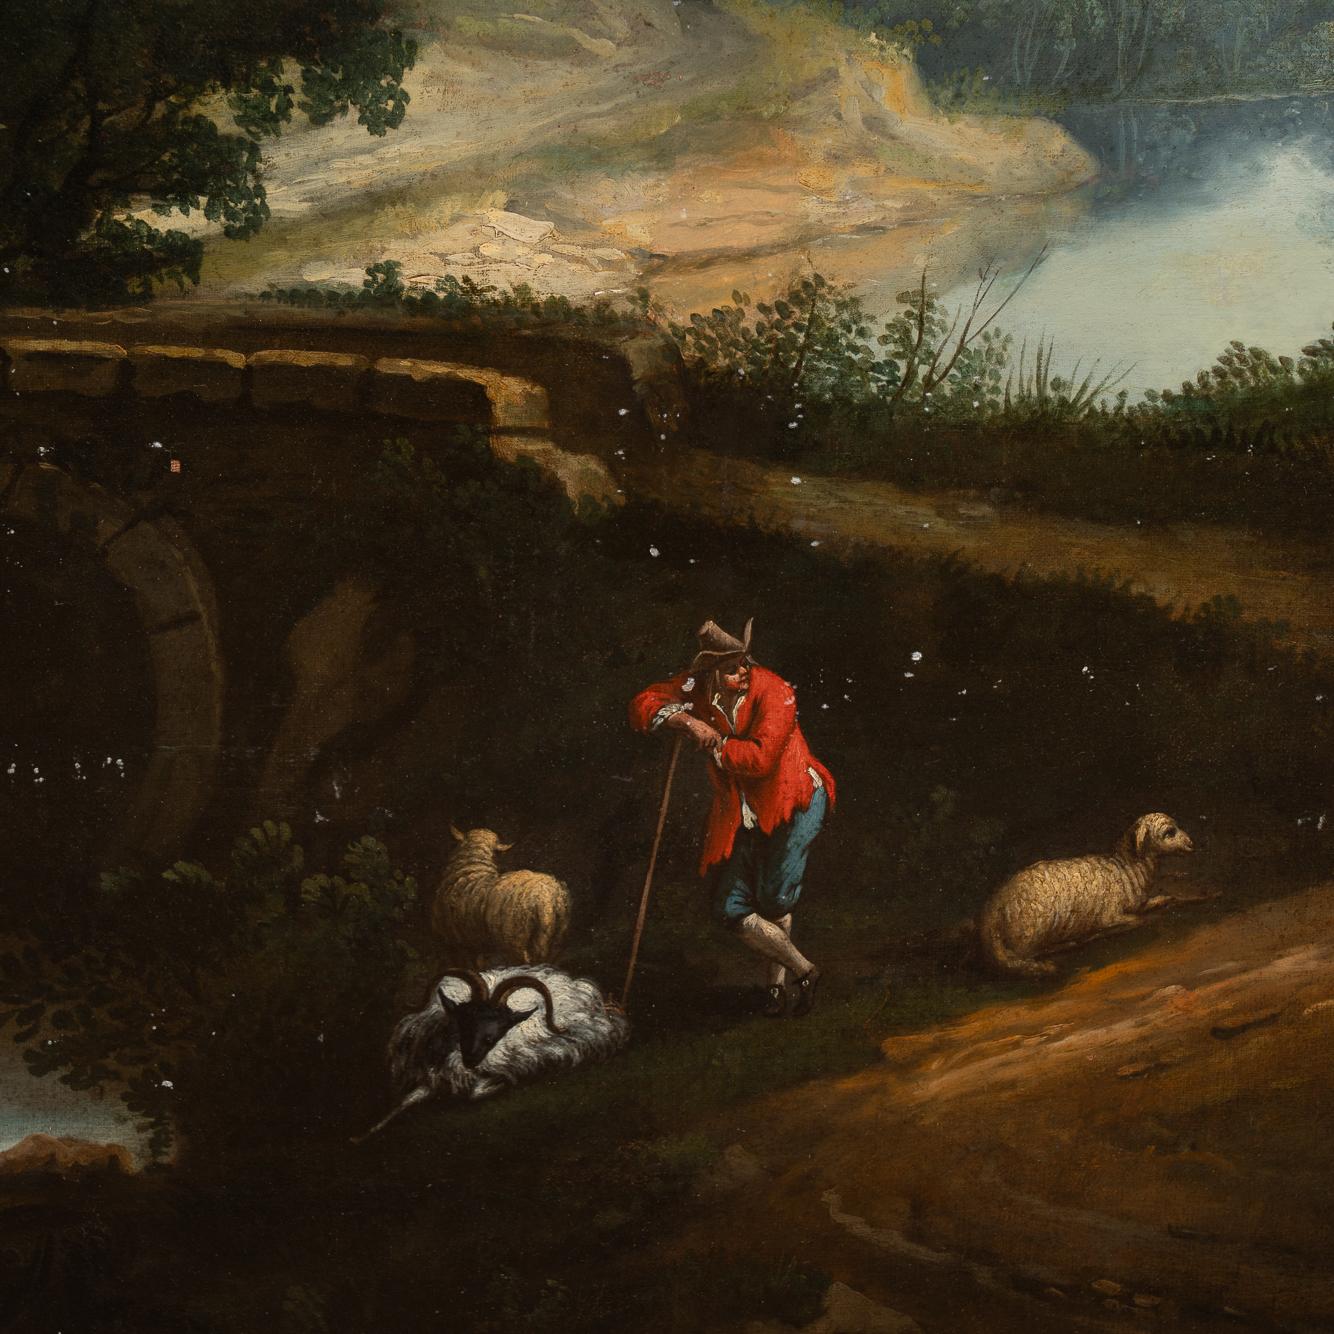 Original Oil on Canvas Painting of Shepherd at River in Evening, circa 1790-1810 1